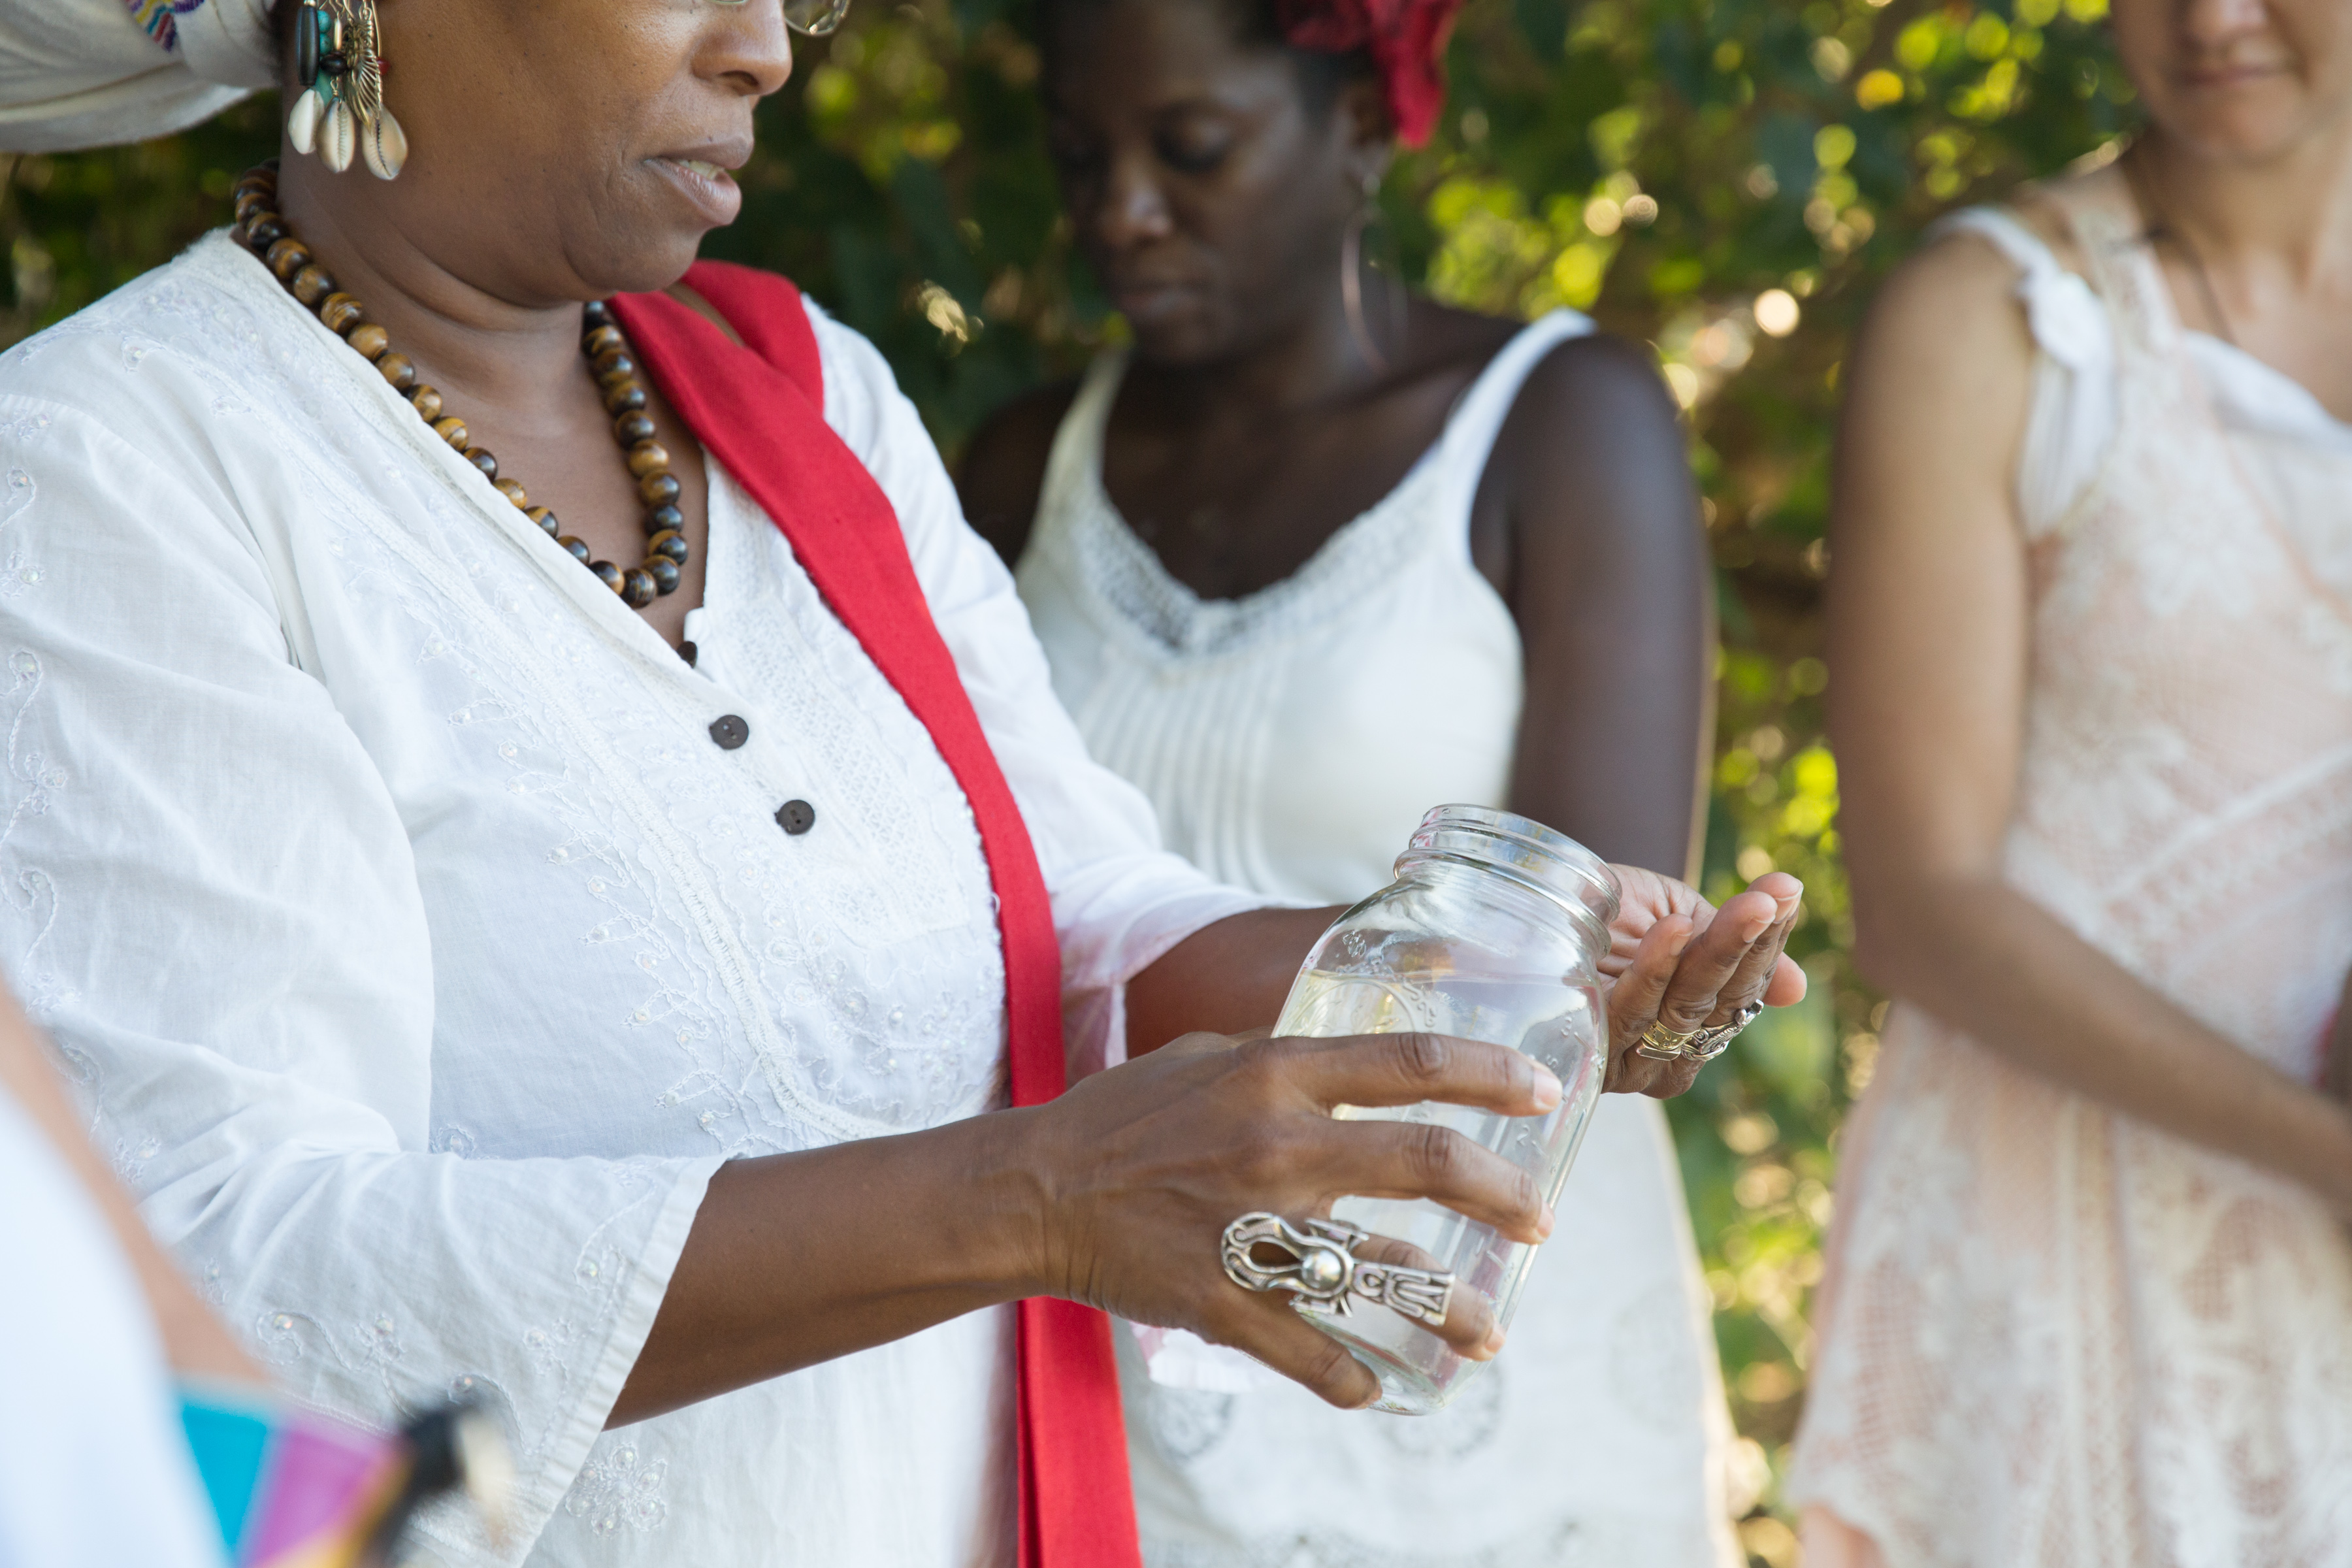 At the bayside in St. Croix, we passed a jar of sea water among us, each offering a wish or hope or blessing back to the sea. Dr. Chenzira Davis-Kahina pours water on her hands as part of her ritual. Fishtrap collaborator Oceana James and Paloma McGregor stand in the background.